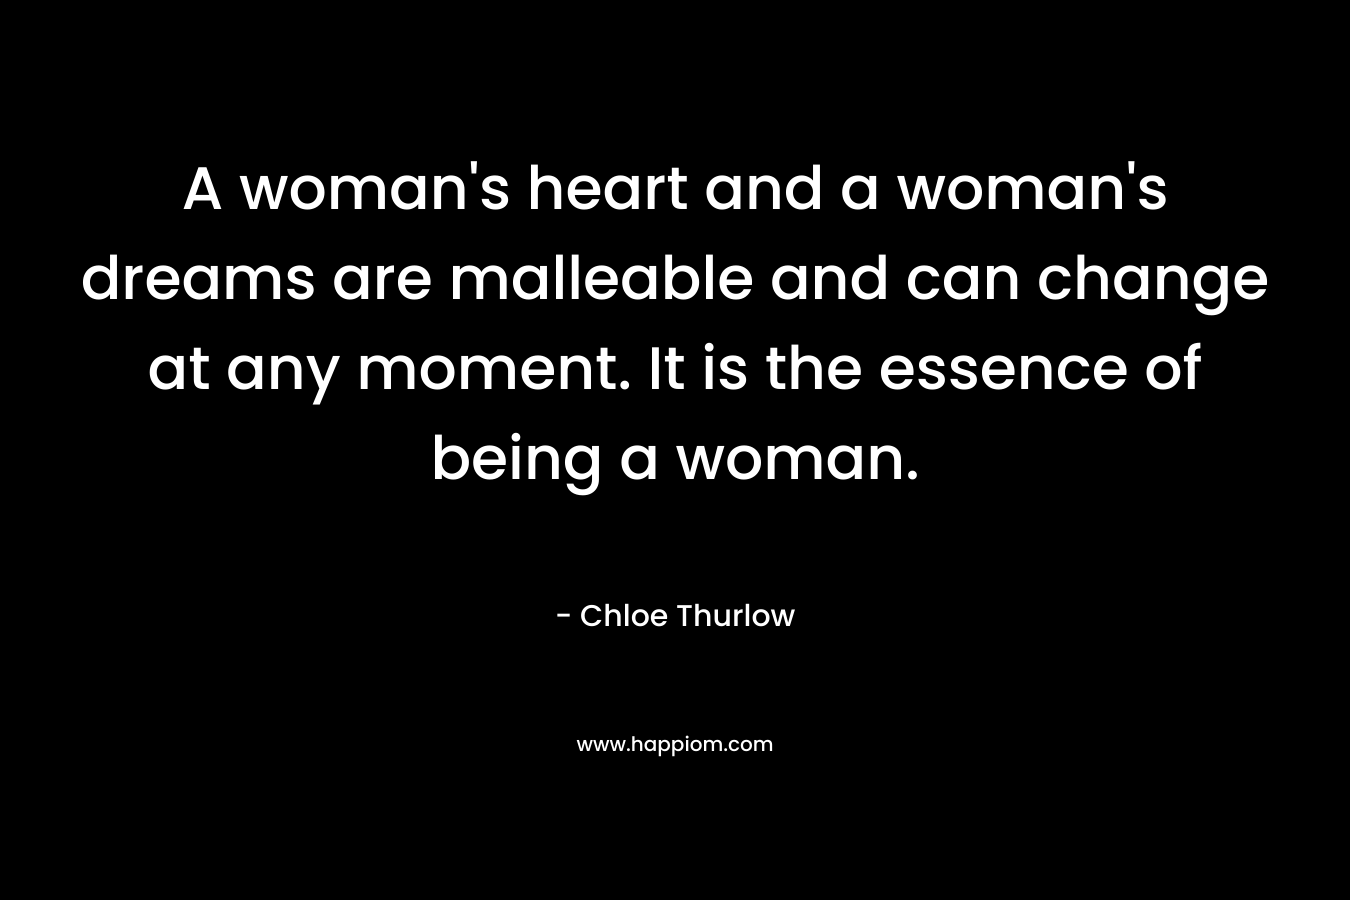 A woman's heart and a woman's dreams are malleable and can change at any moment. It is the essence of being a woman.